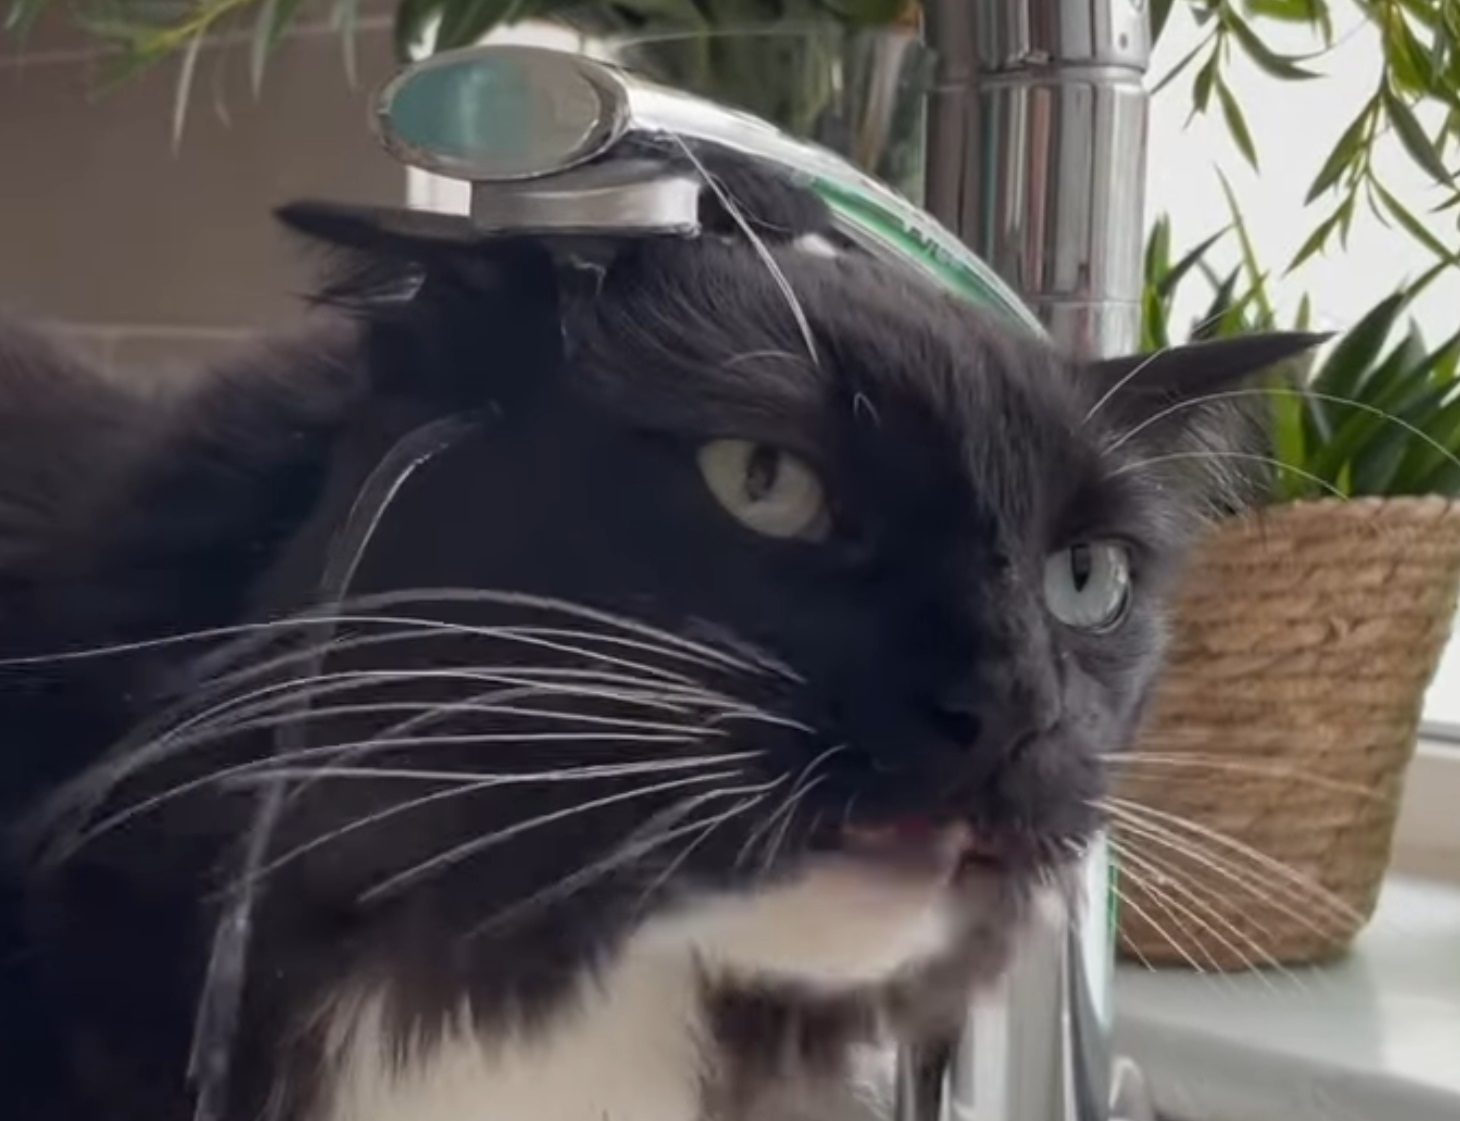 This Cat Completely Misses Water Trying To Drink From Sink